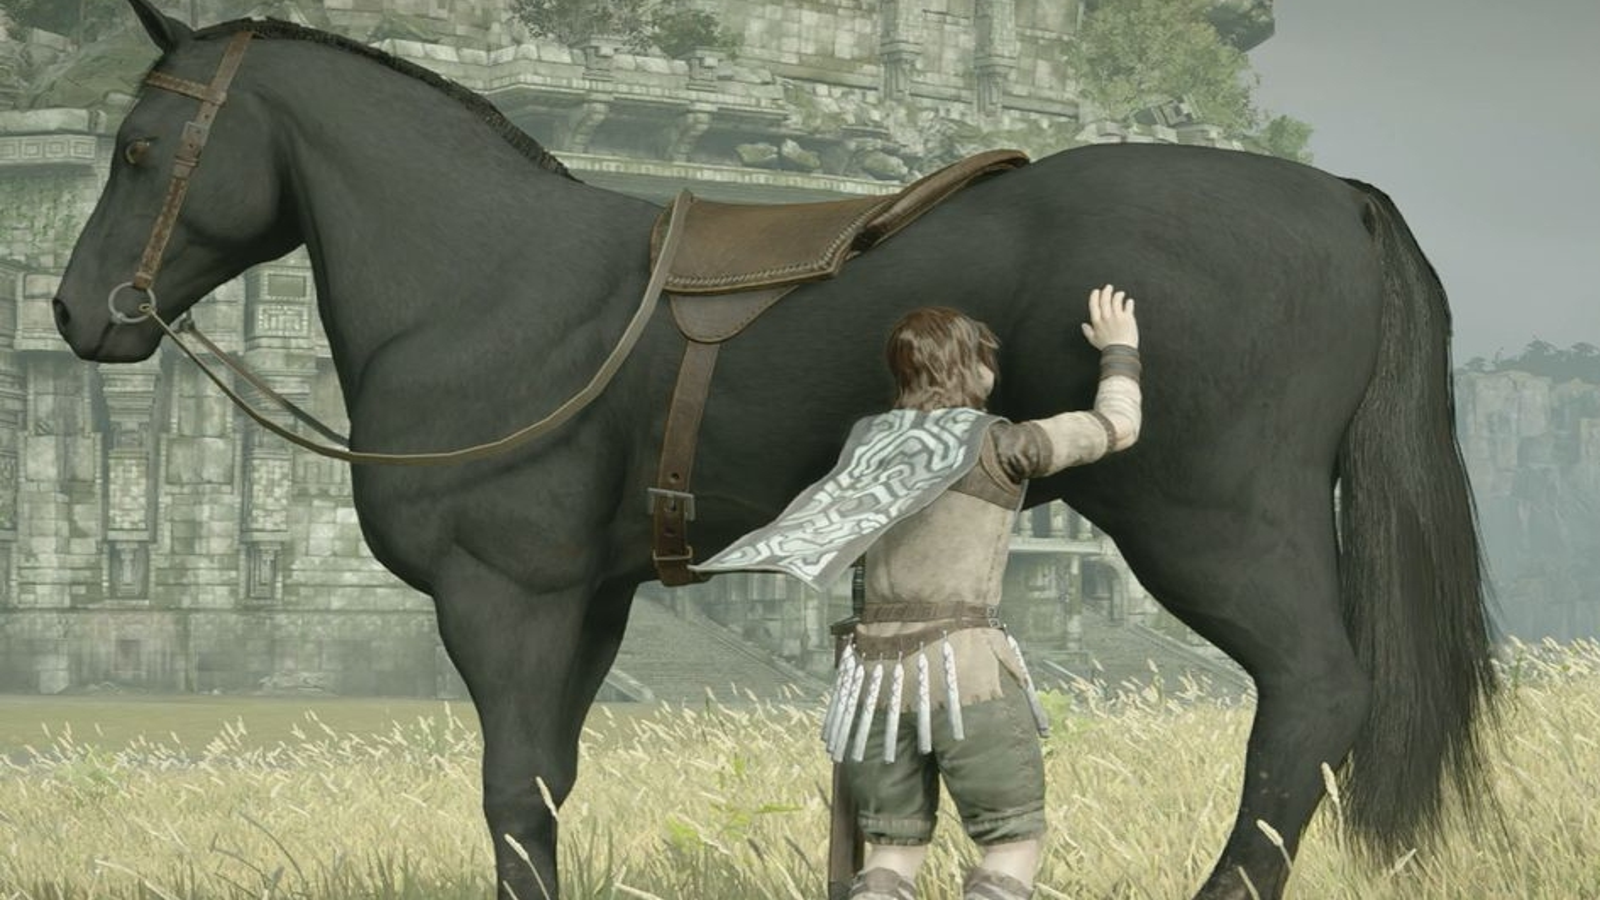 Shadow of the Colossus Trophy Guide •